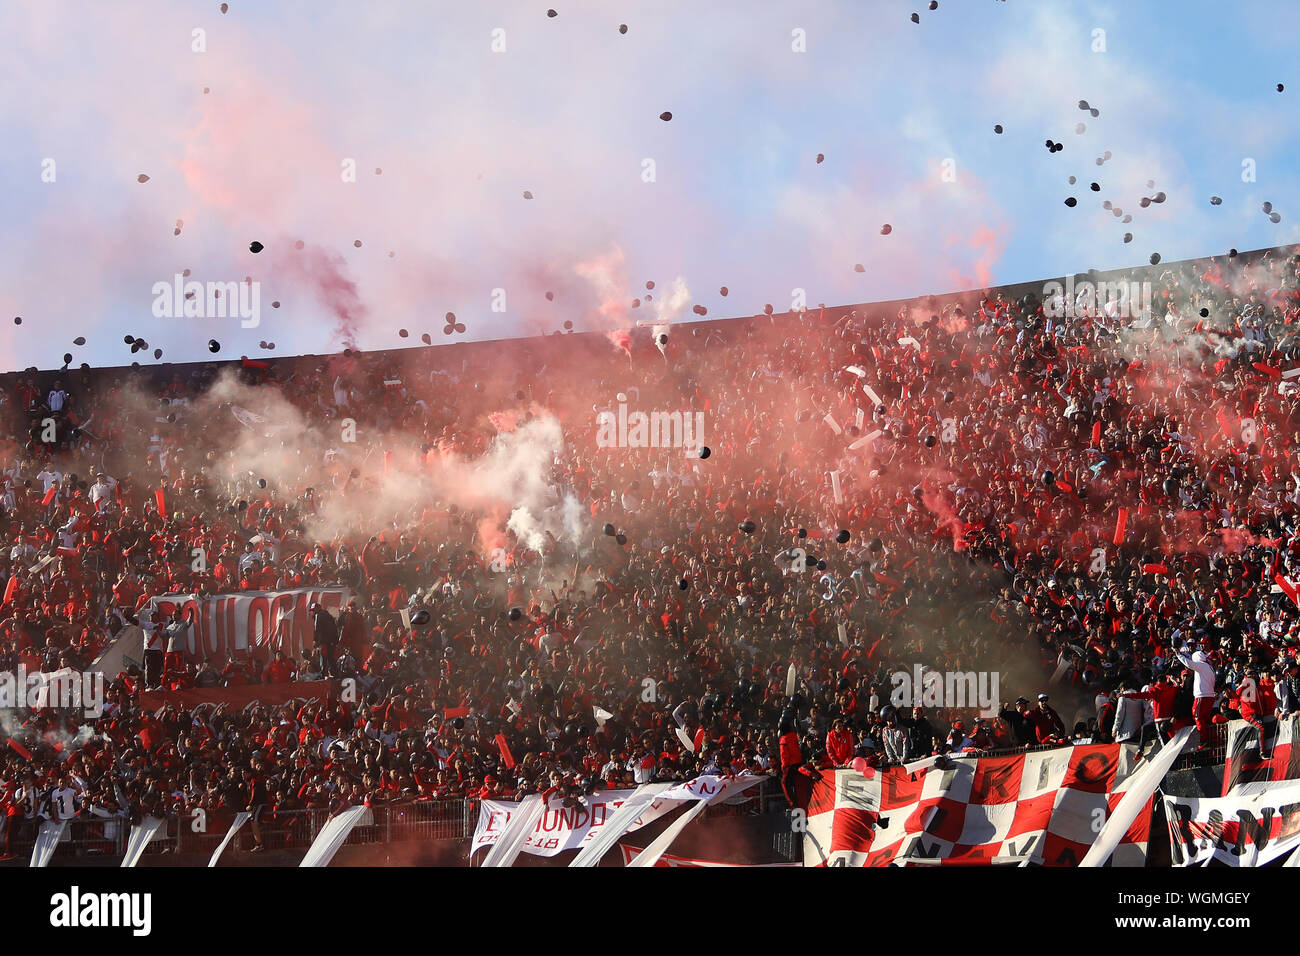 Buenos Aires, Argentina - September 01, 2019: River Plate fans in the beginning of the match in the Monumental Stadium in Buenos Aires, Argentina Stock Photo